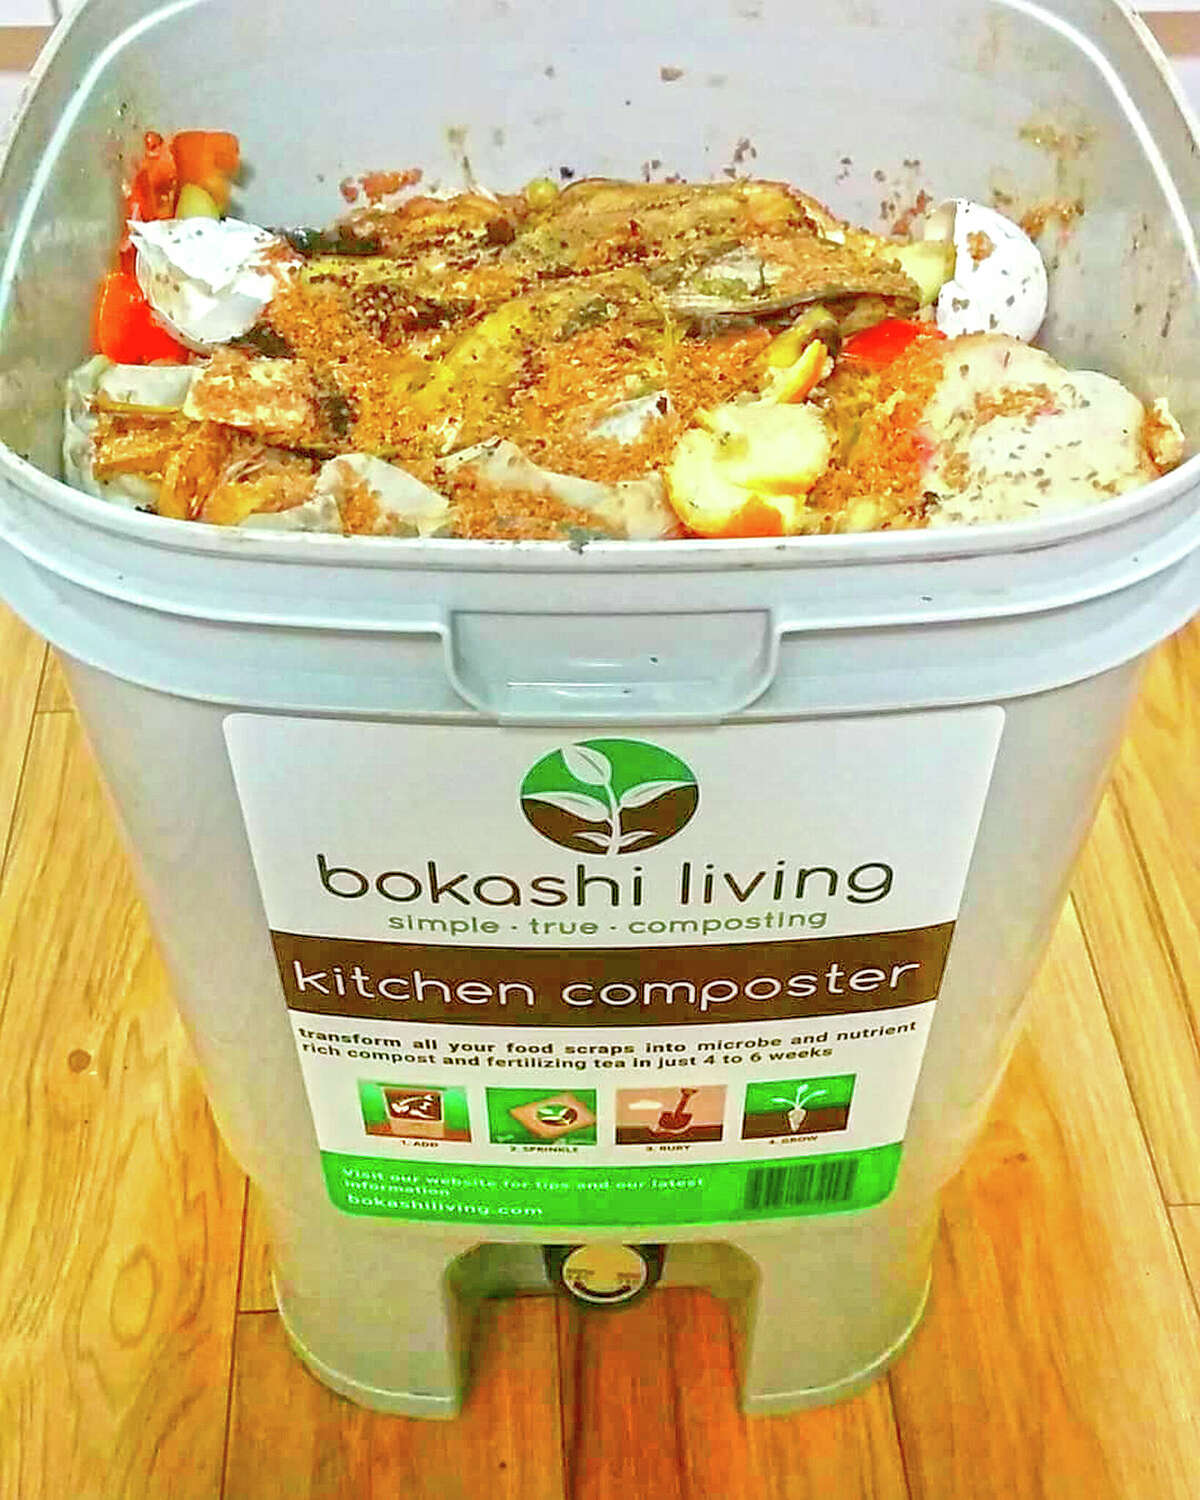 How long does it take to convert food into bokashi compost?